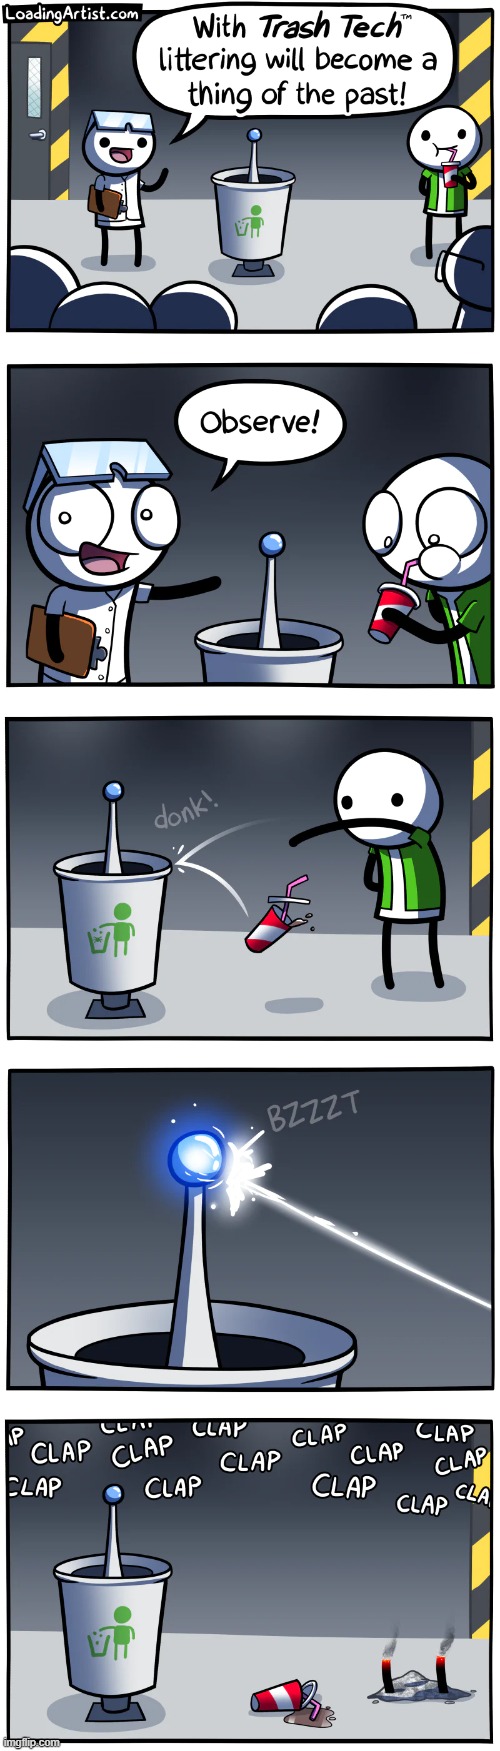 As someone who never litters, we need this. (Although, what if the device malfunctions and misses?) | image tagged in loading,artist,trash can | made w/ Imgflip meme maker